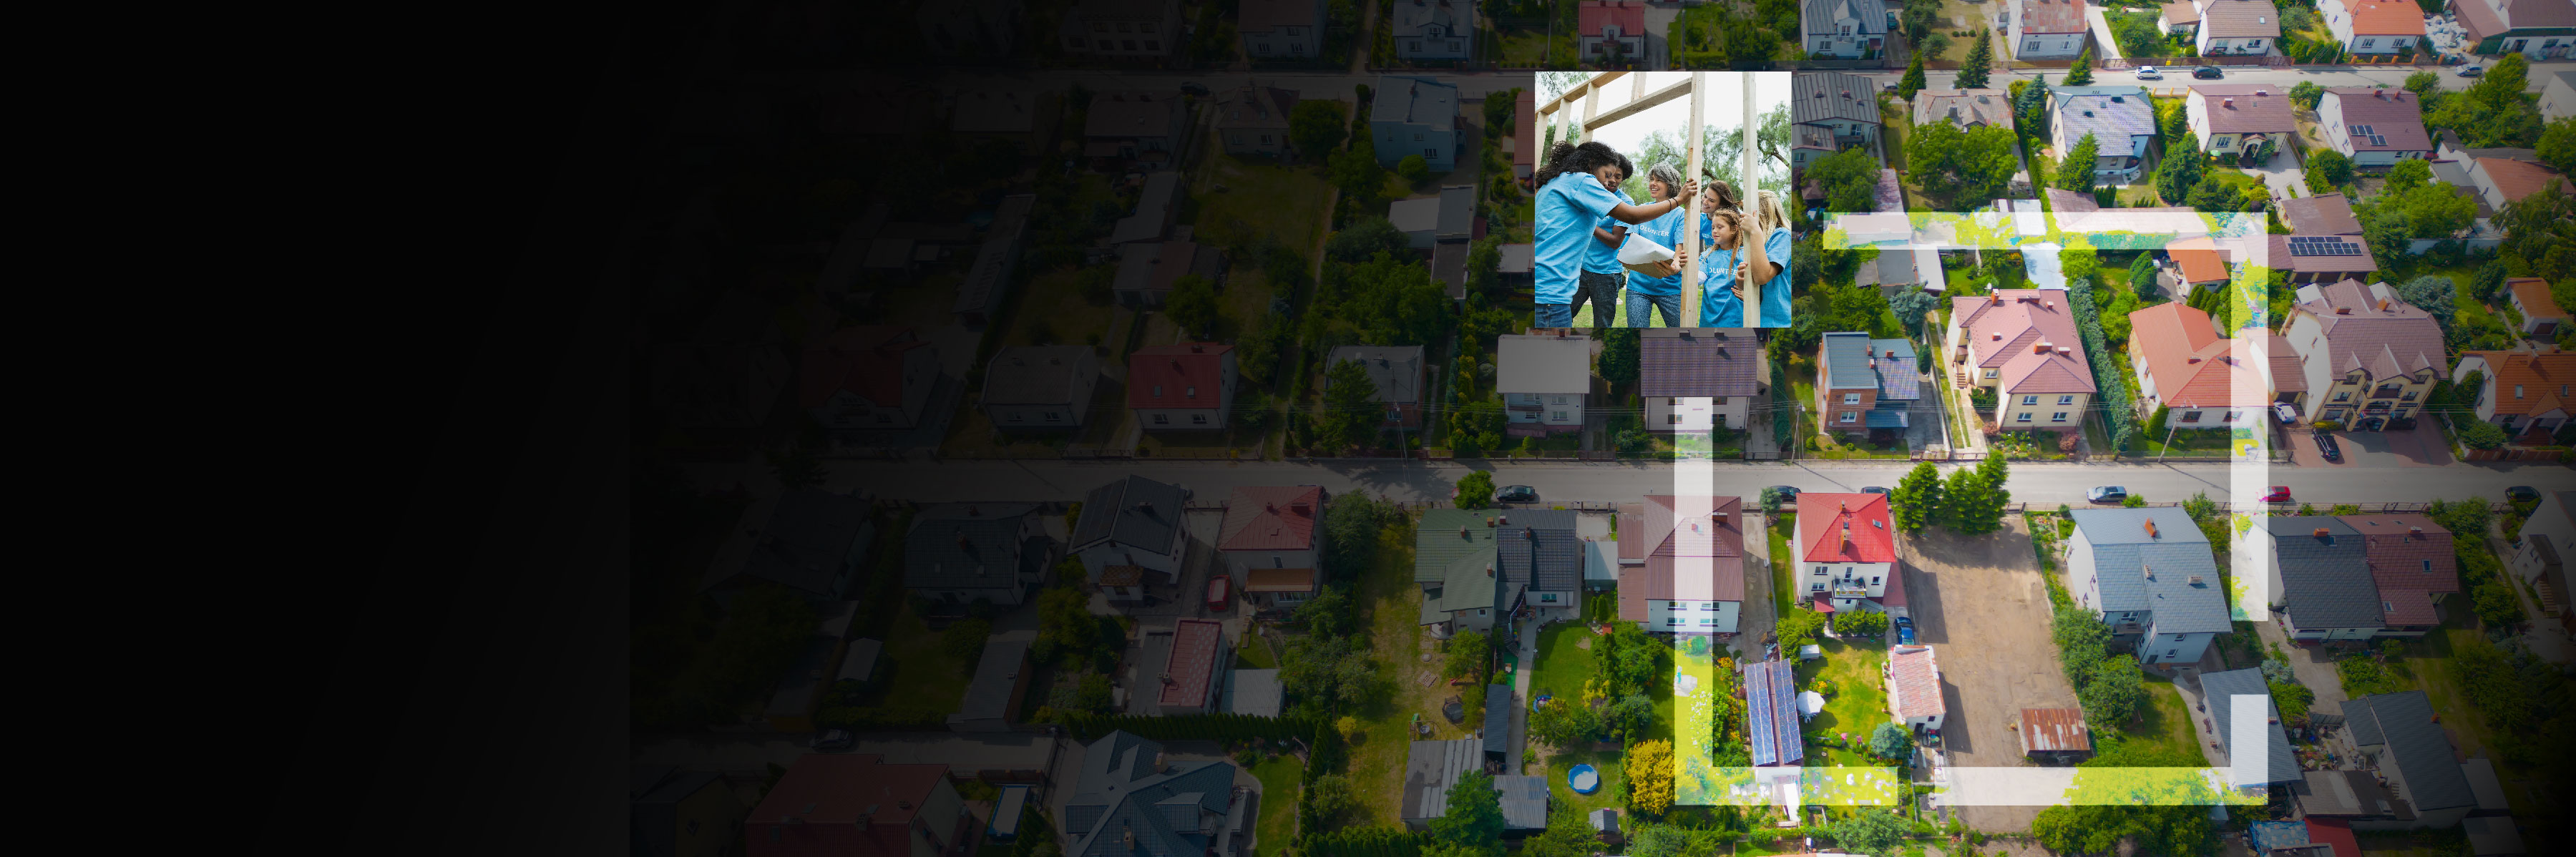 An aerial view of blocks of suburban houses overlaid with an image of people standing together near a wooden house frame